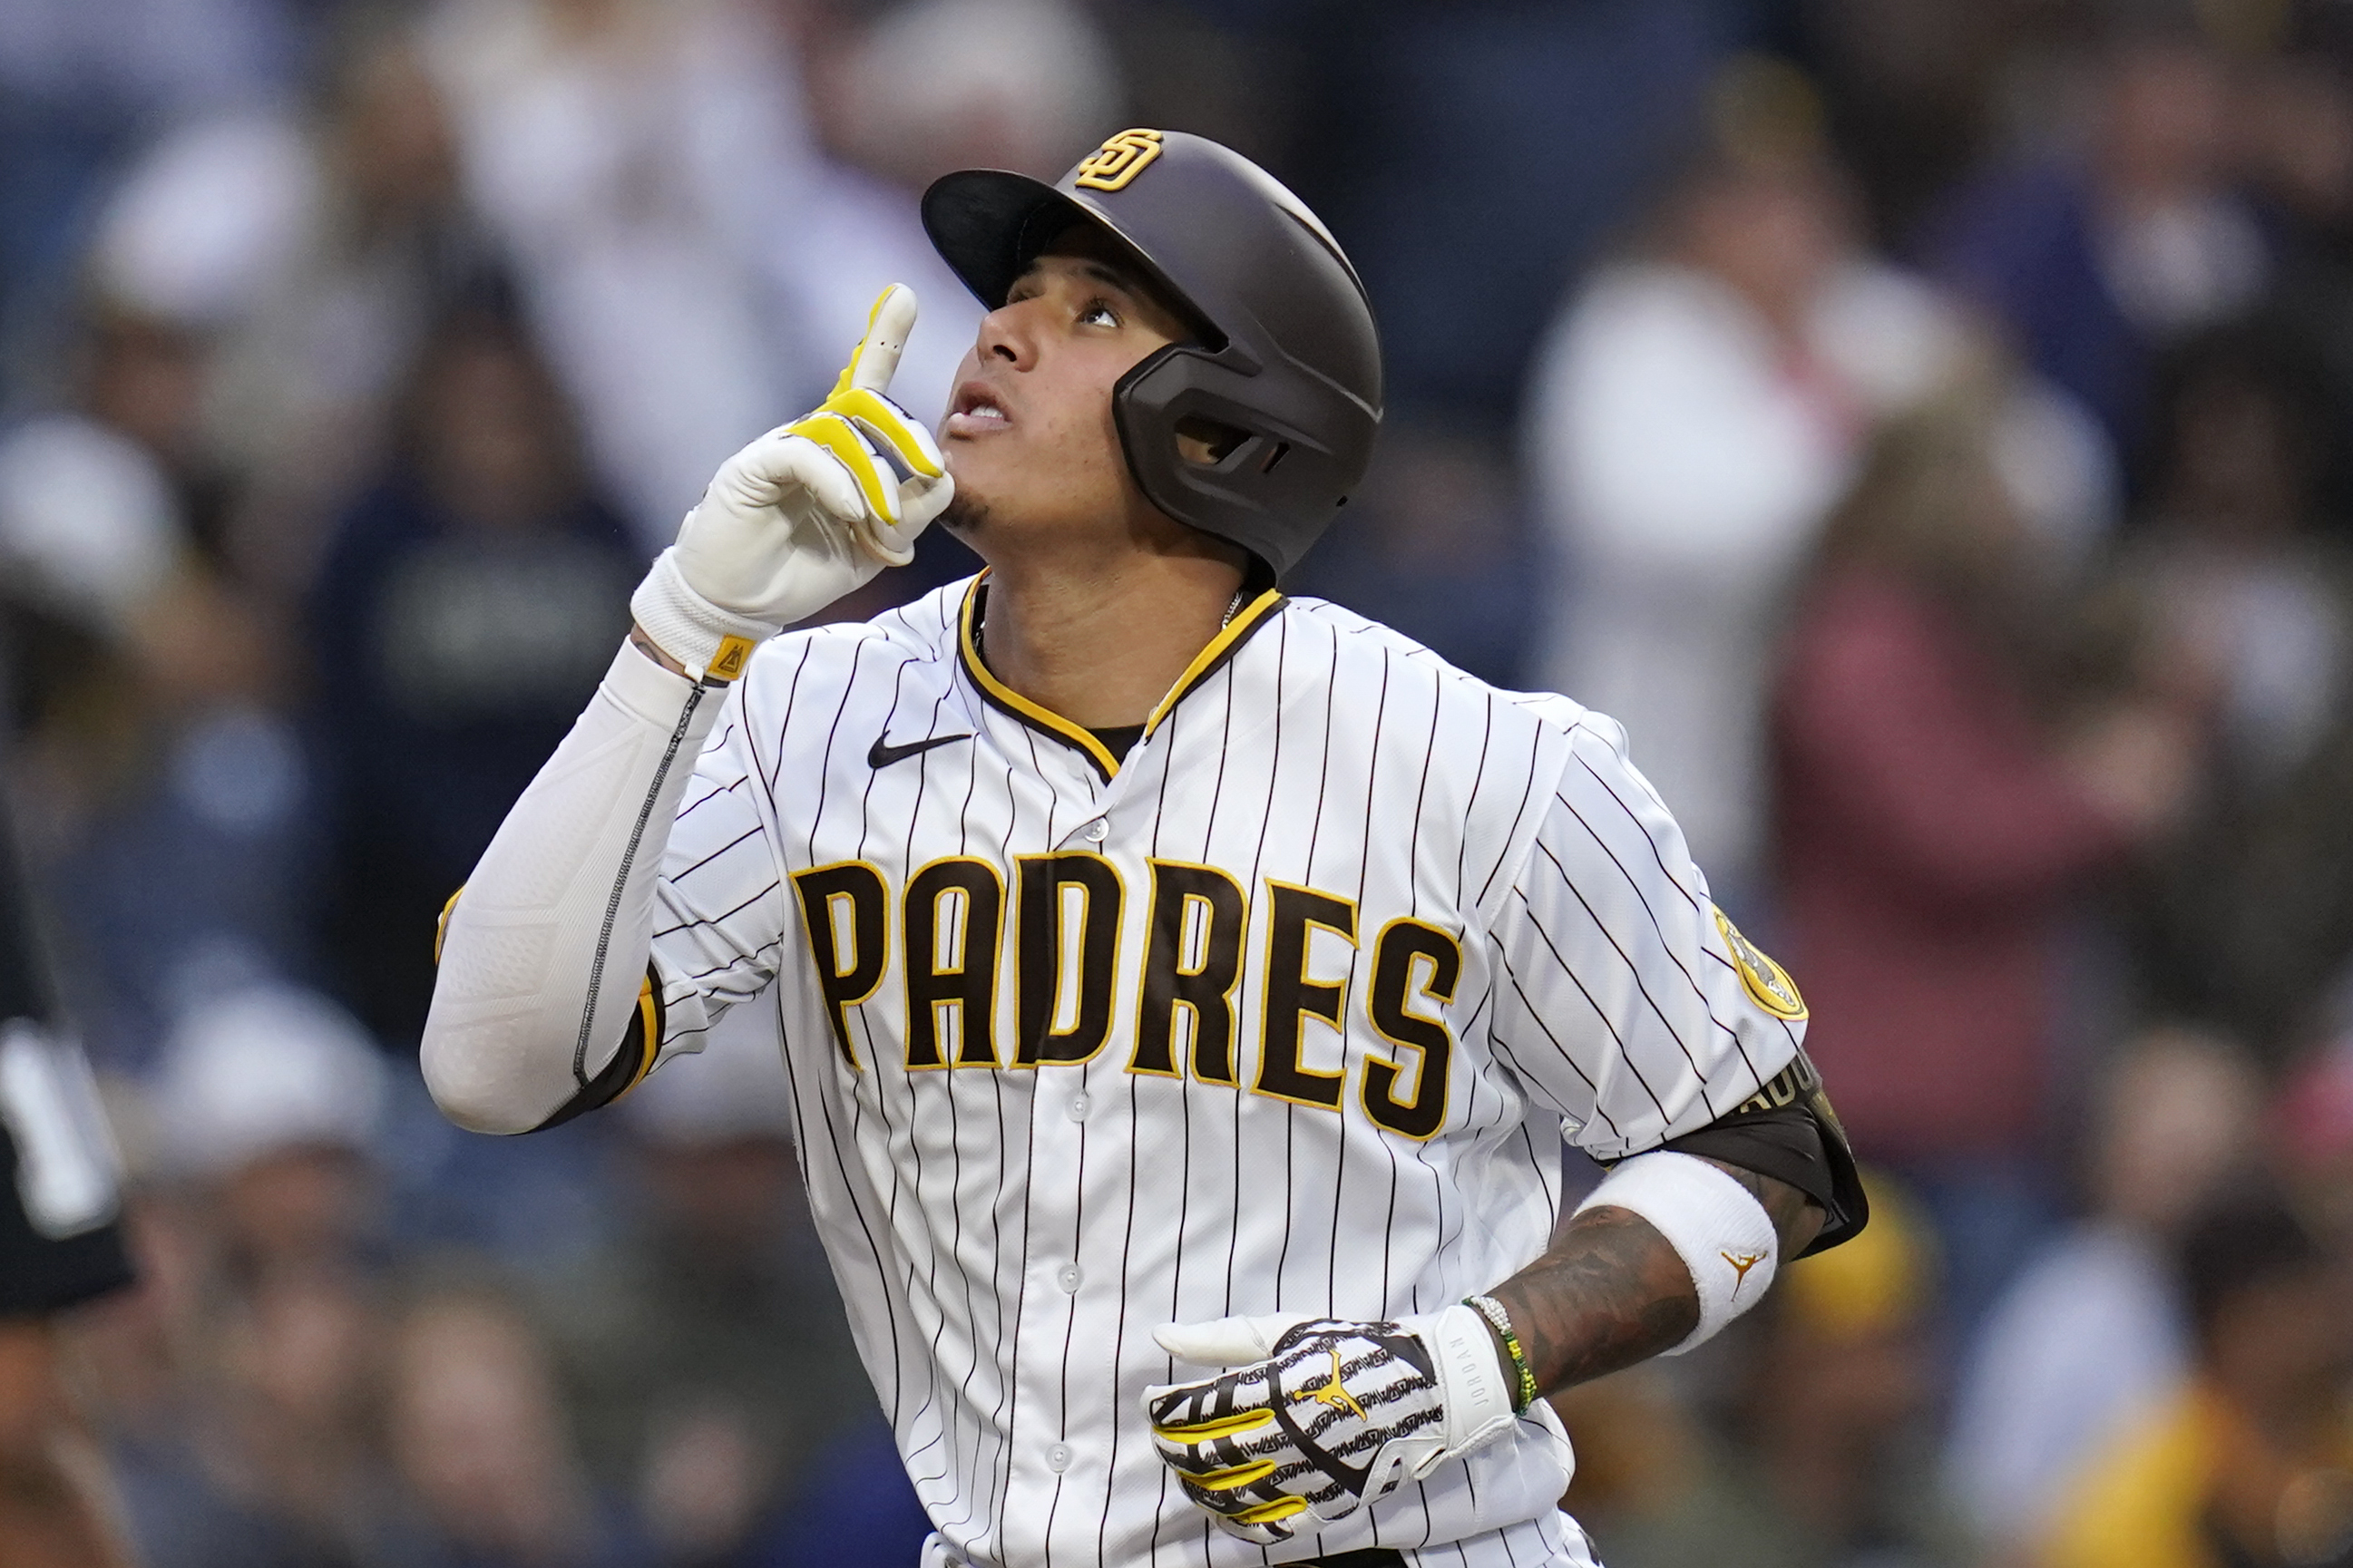 Best Padres player by uniform number